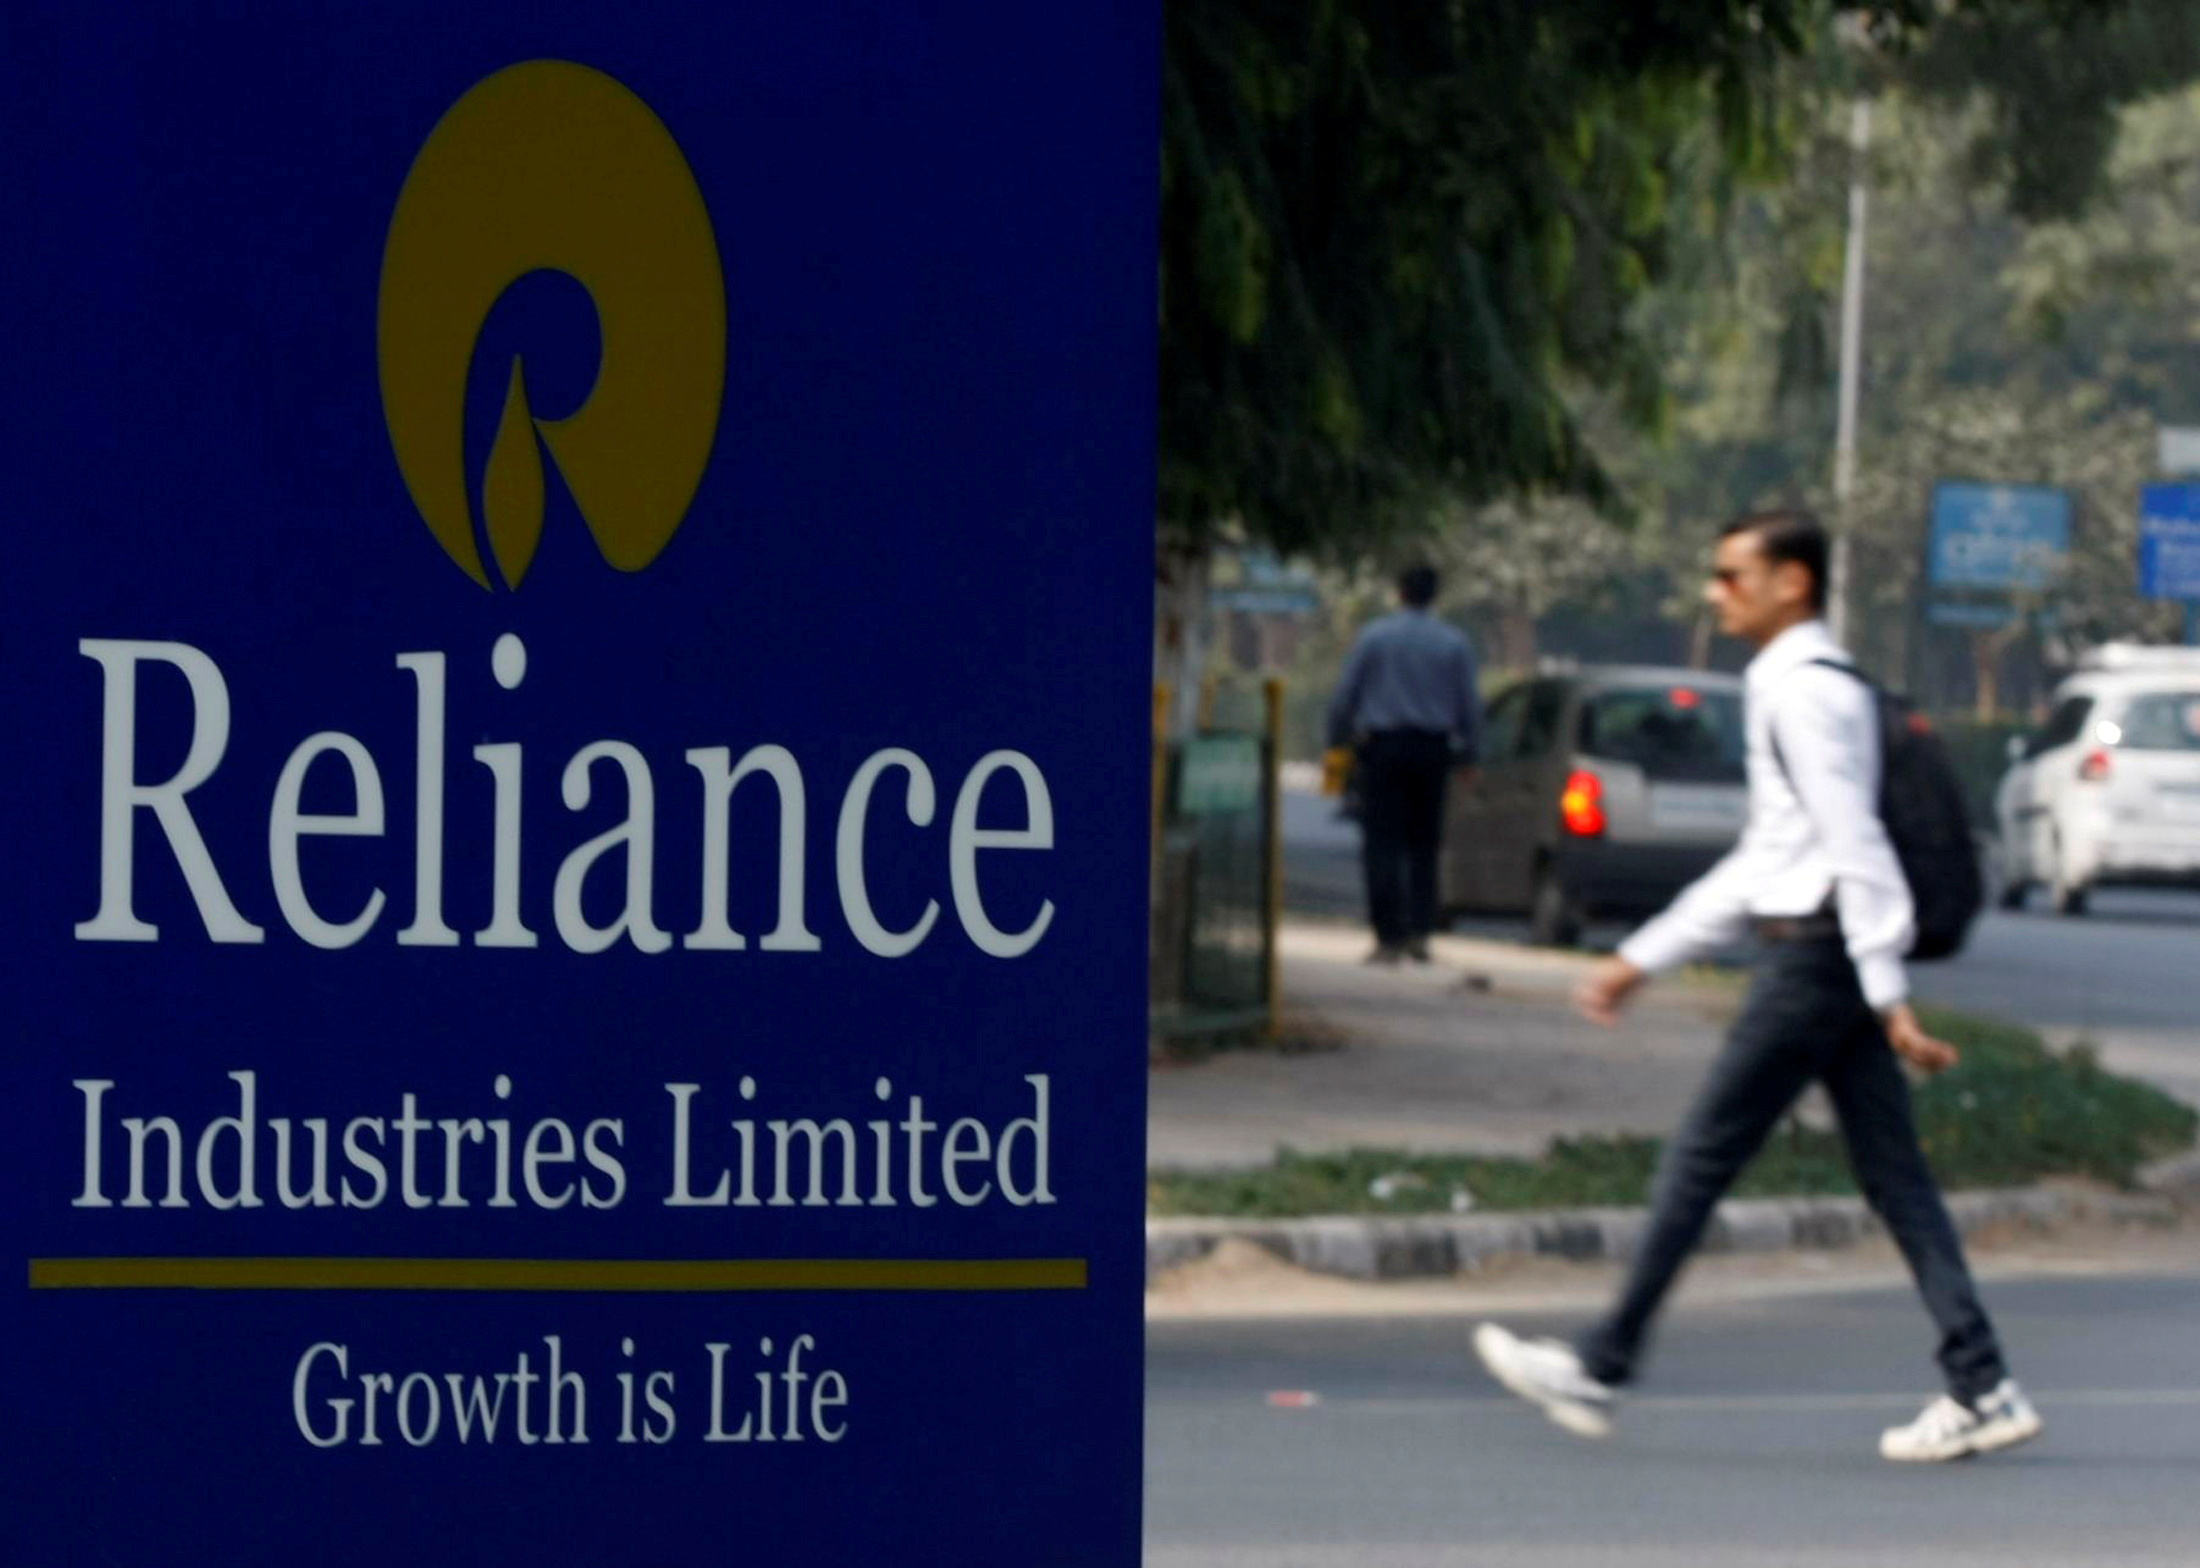 A man walks past a Reliance Industries Limited sign board installed on a road divider in Gandhinagar